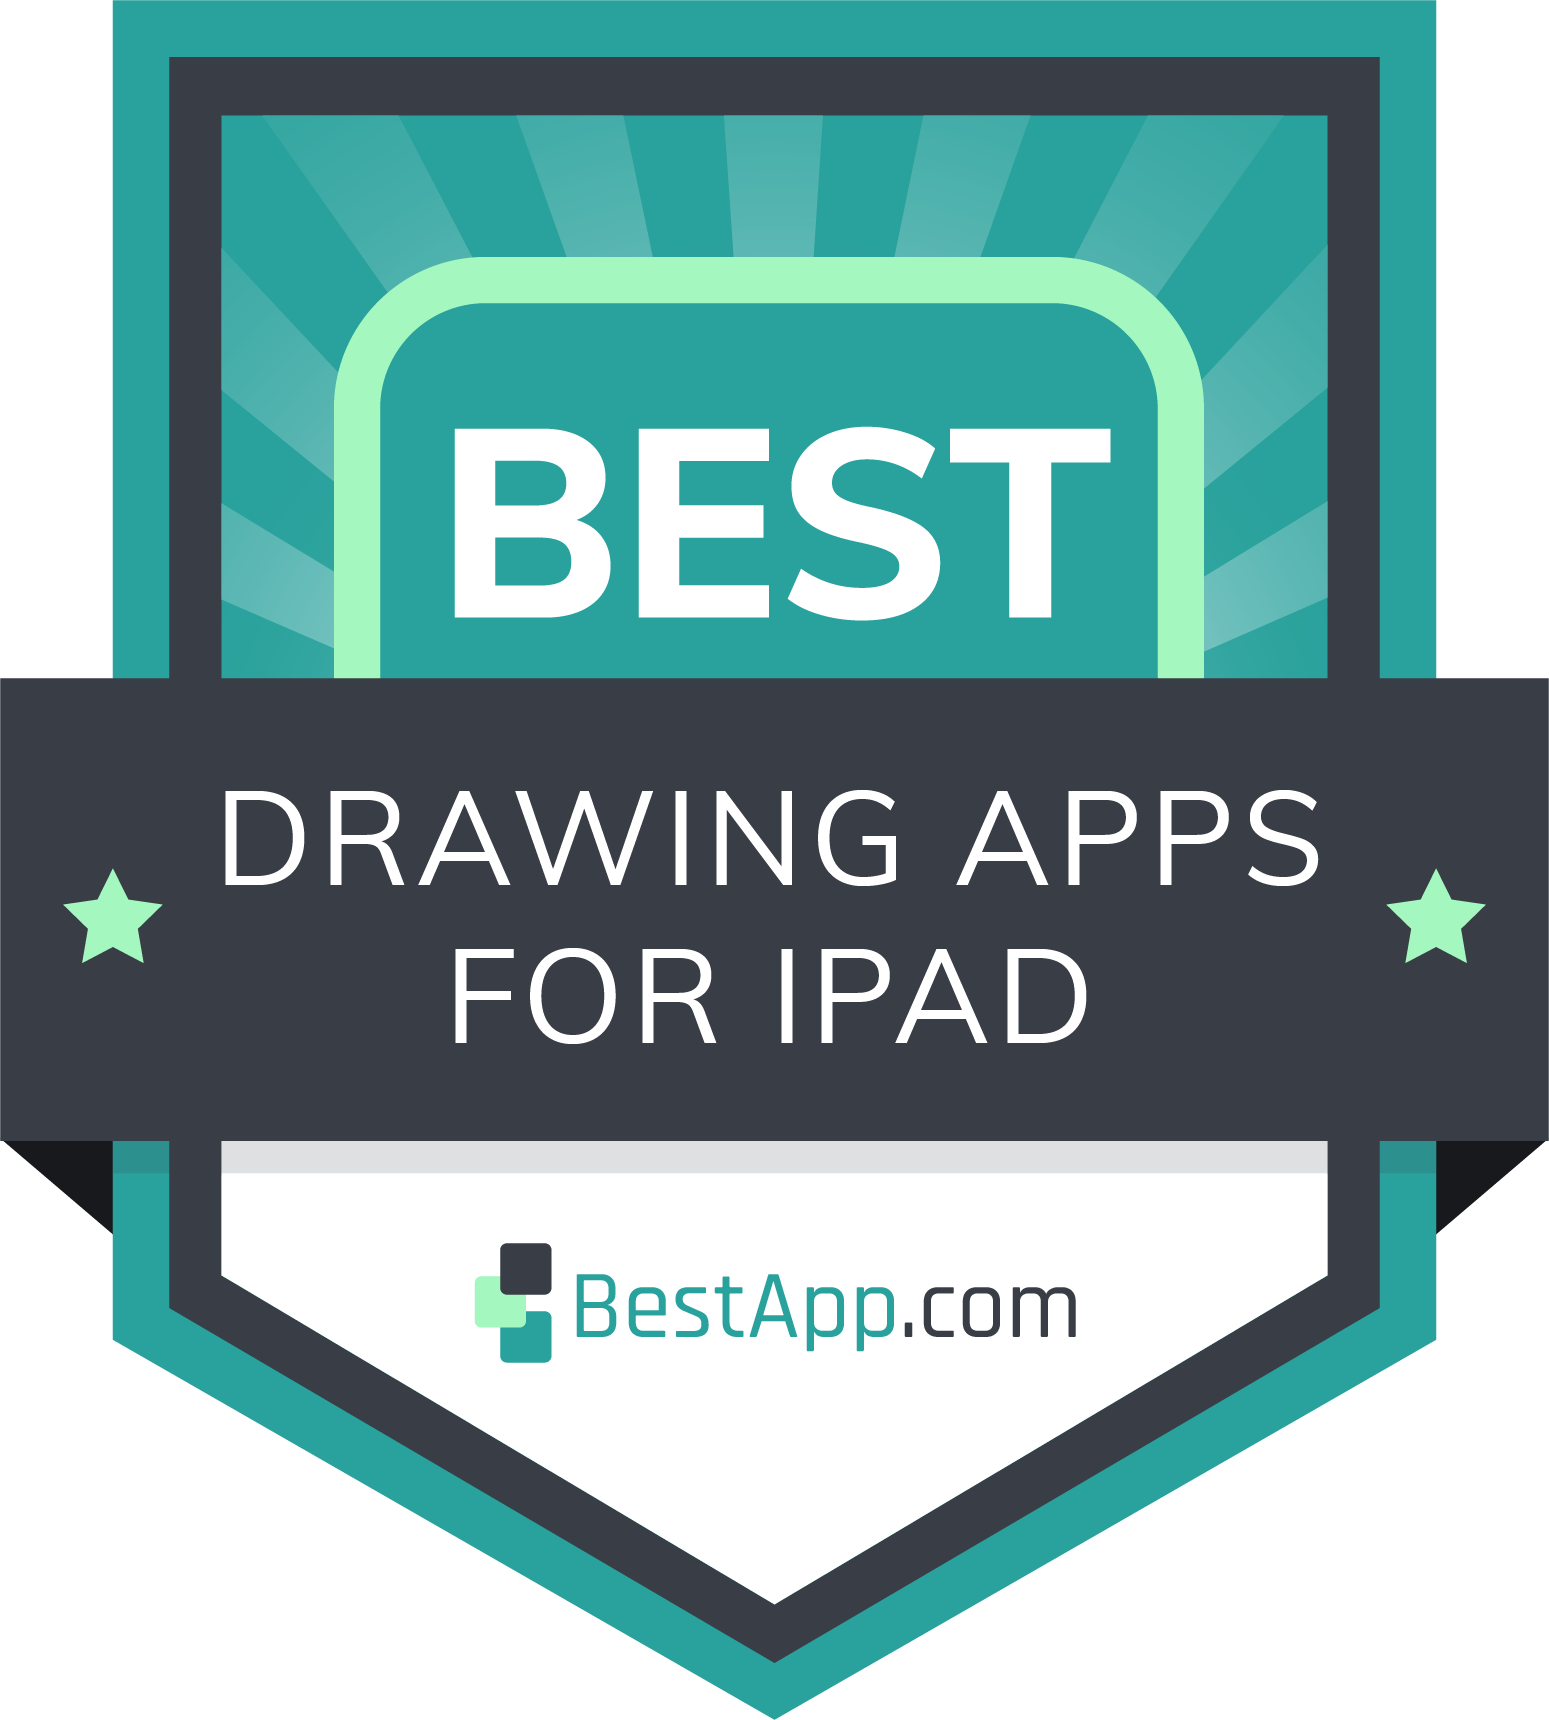 Best Drawing Apps for iPad Badge